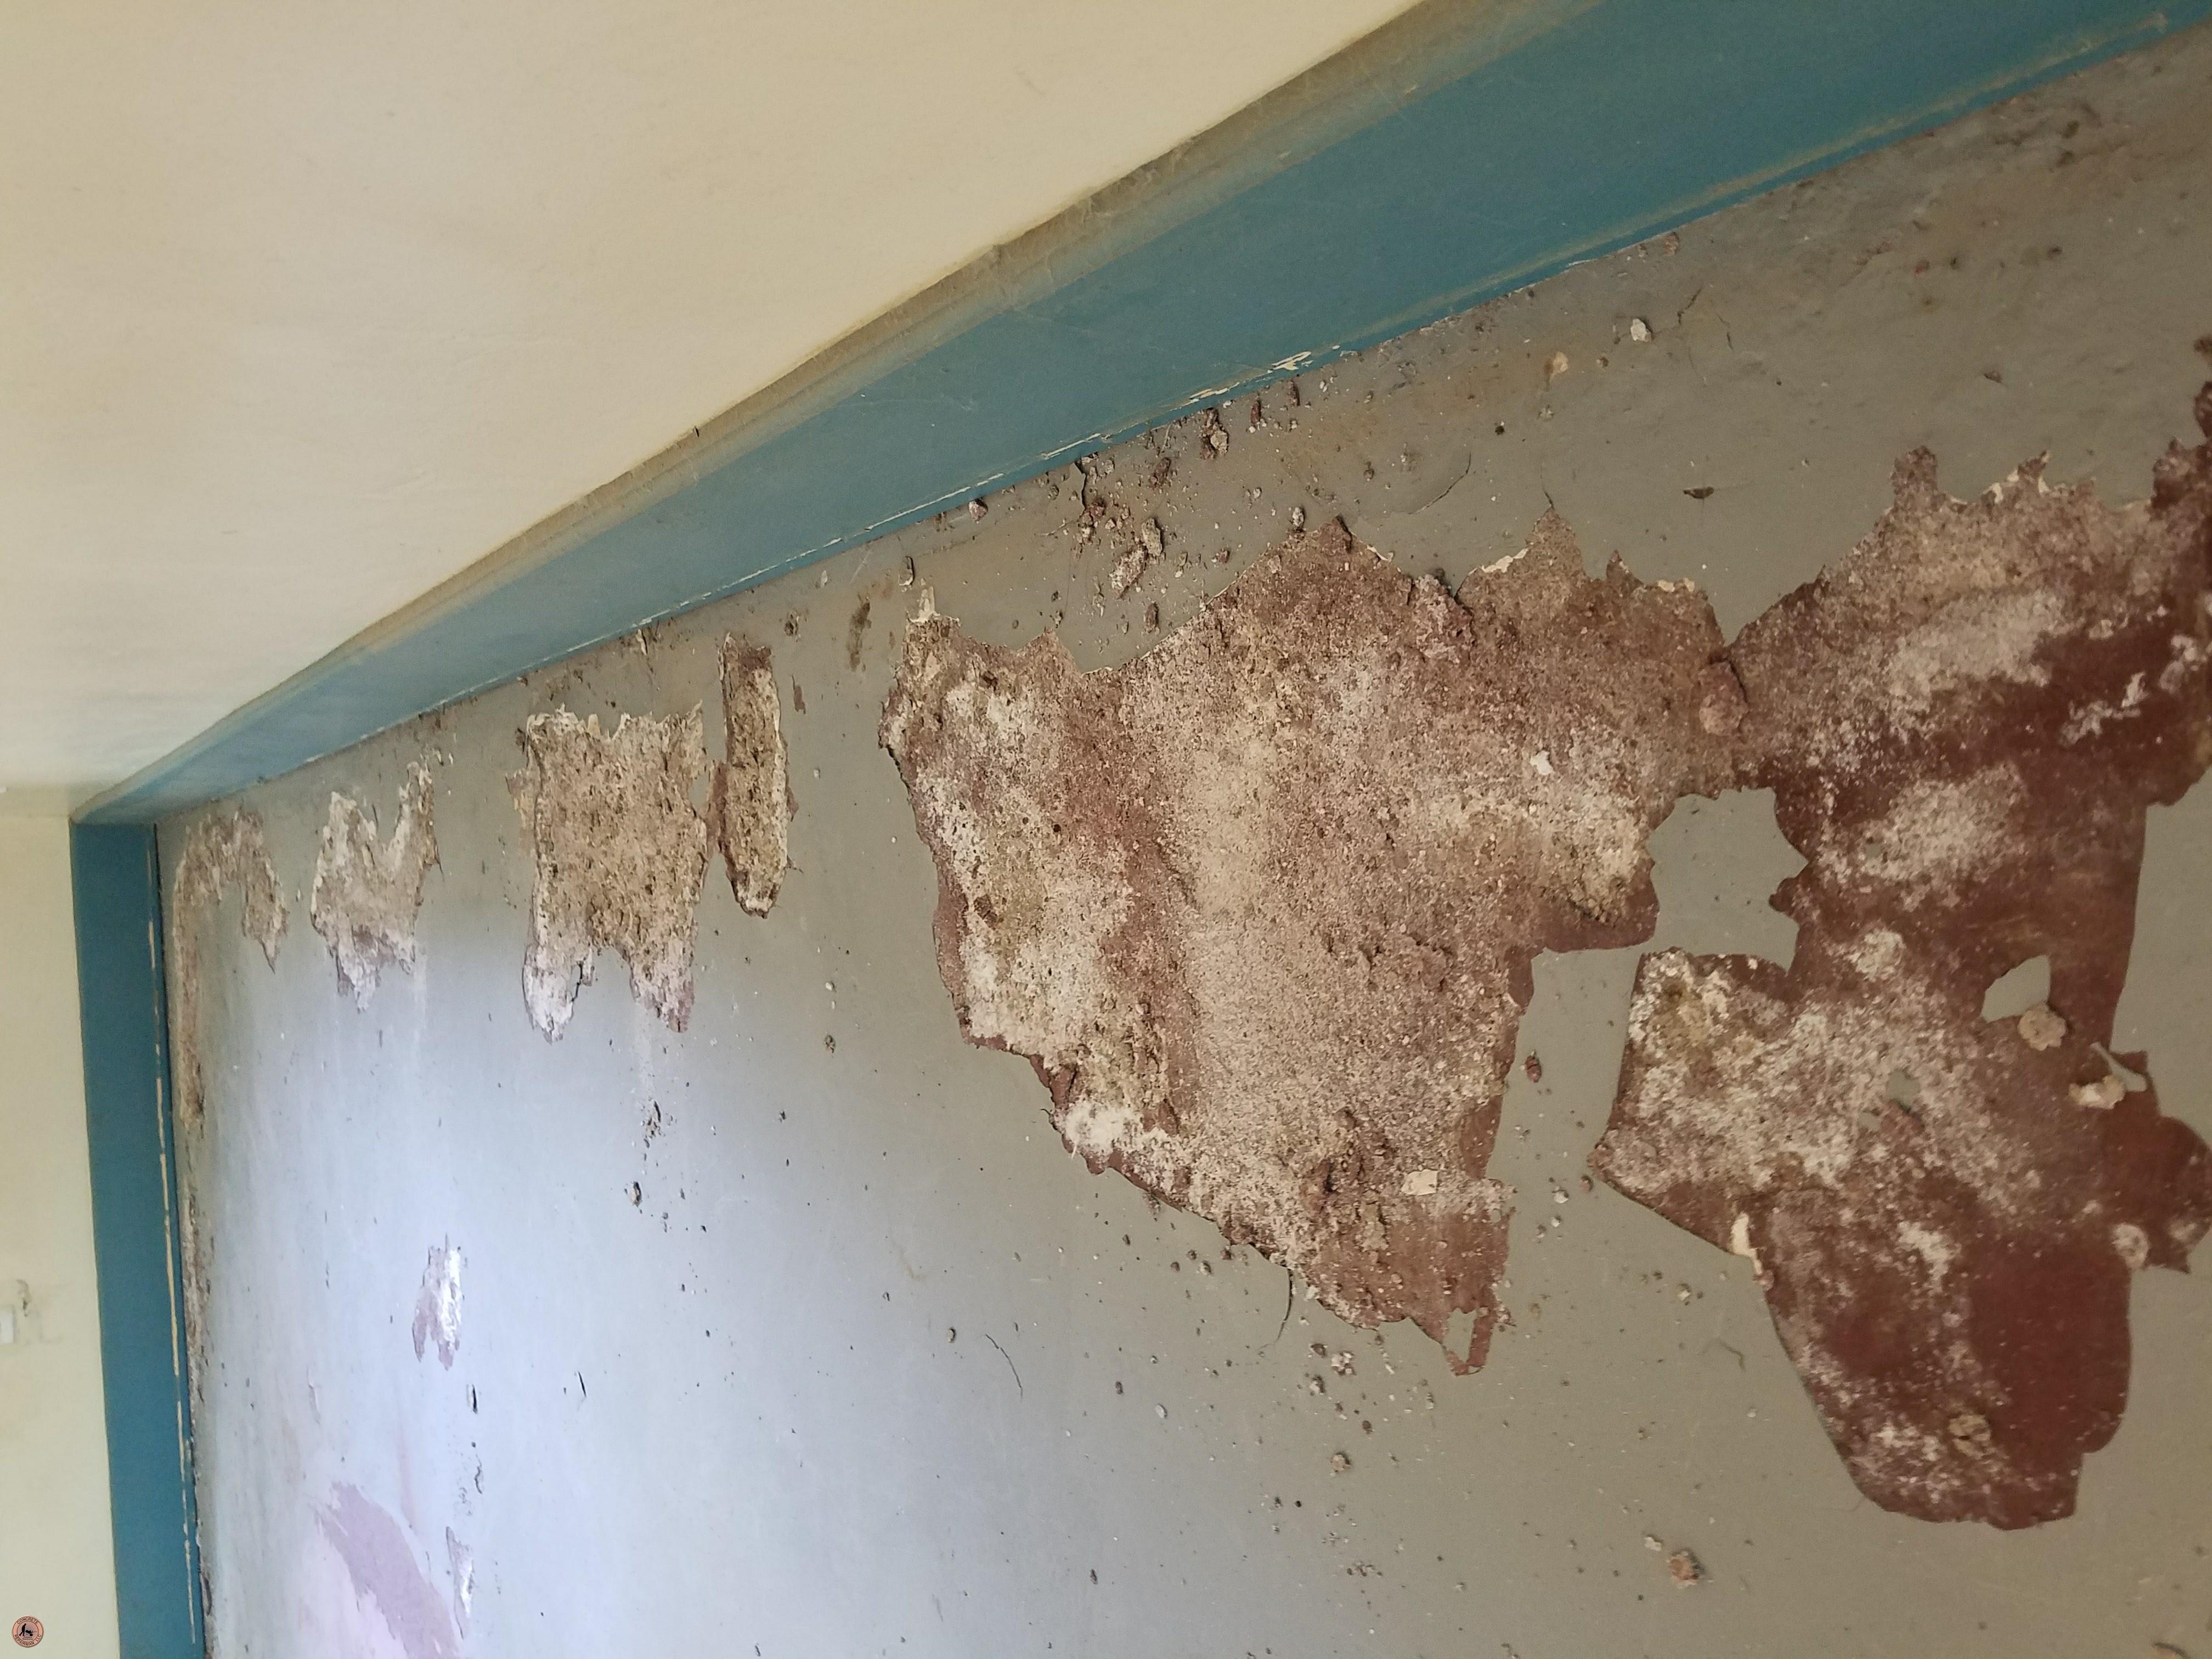 Stem Wall Foundation Problems Spalling & Water Damage